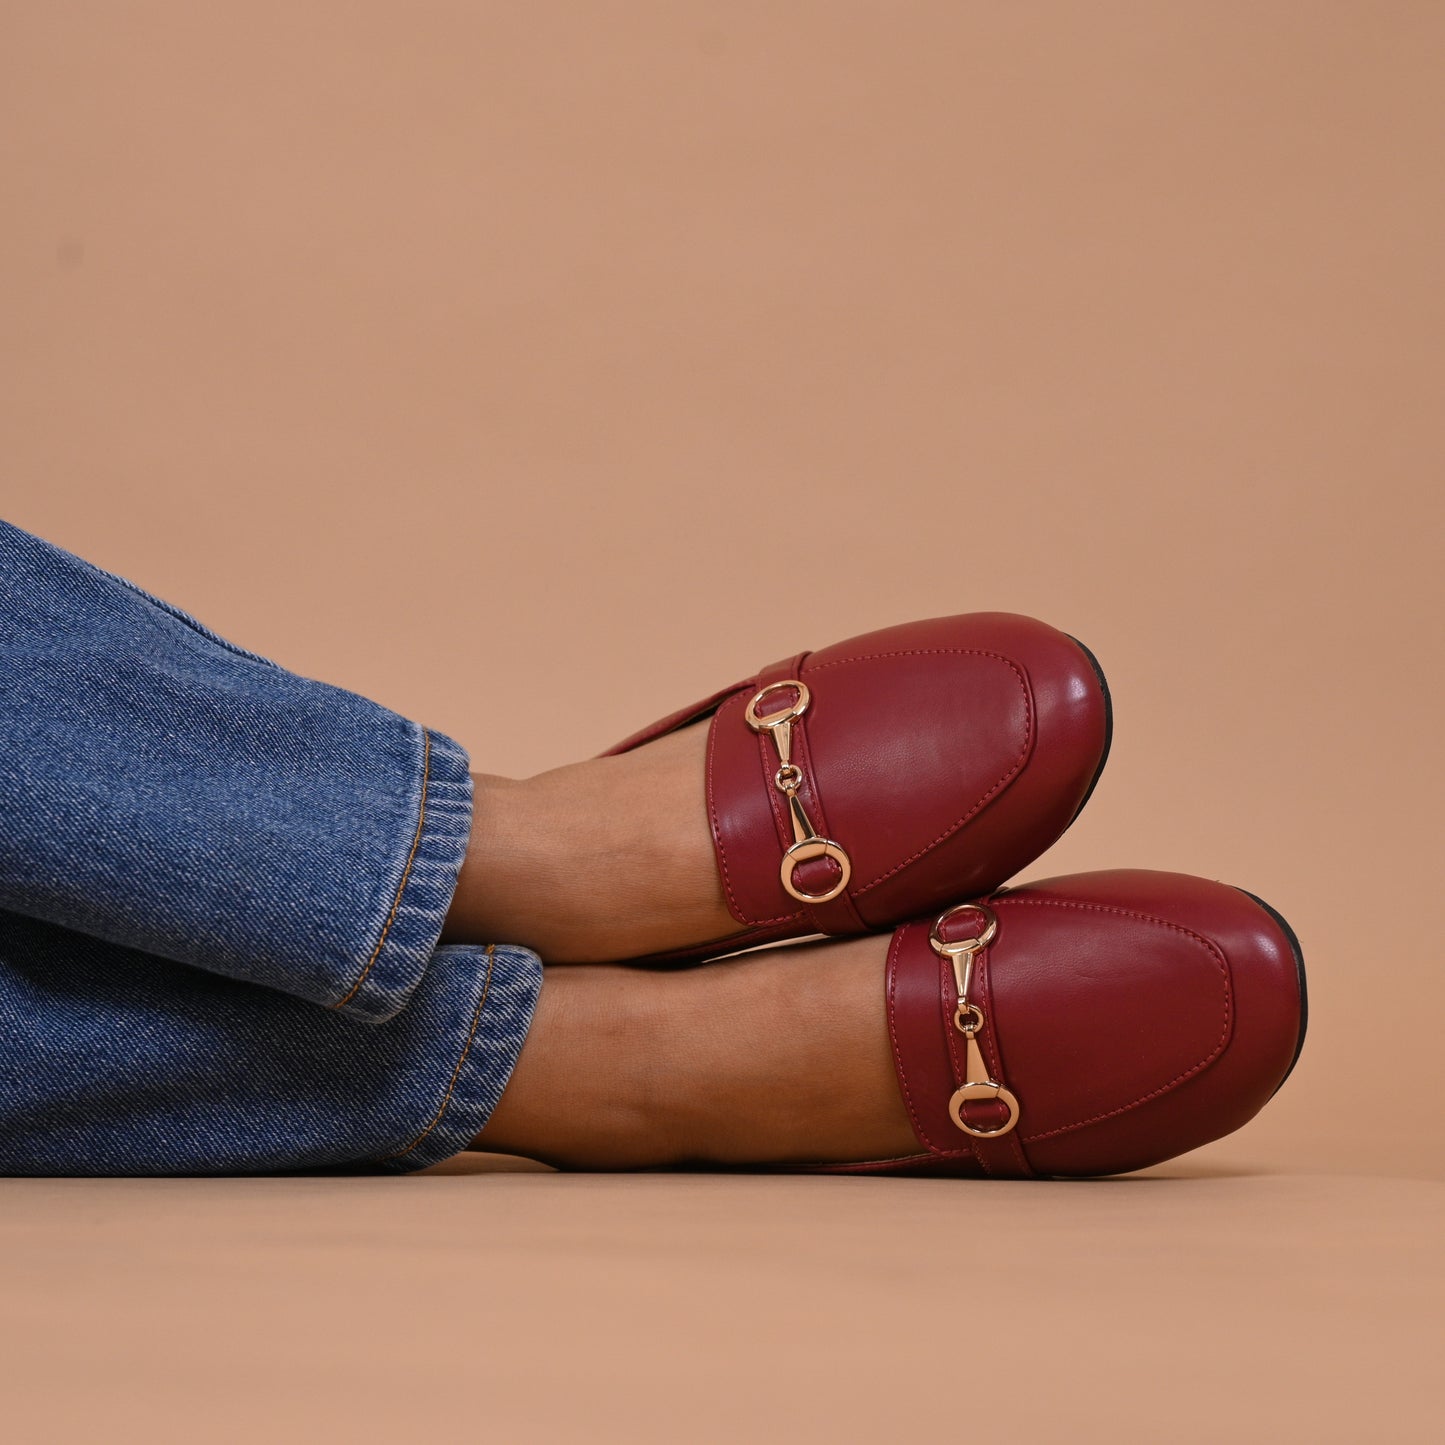 Buckled Casual Women Loafers (Deep Maroon)